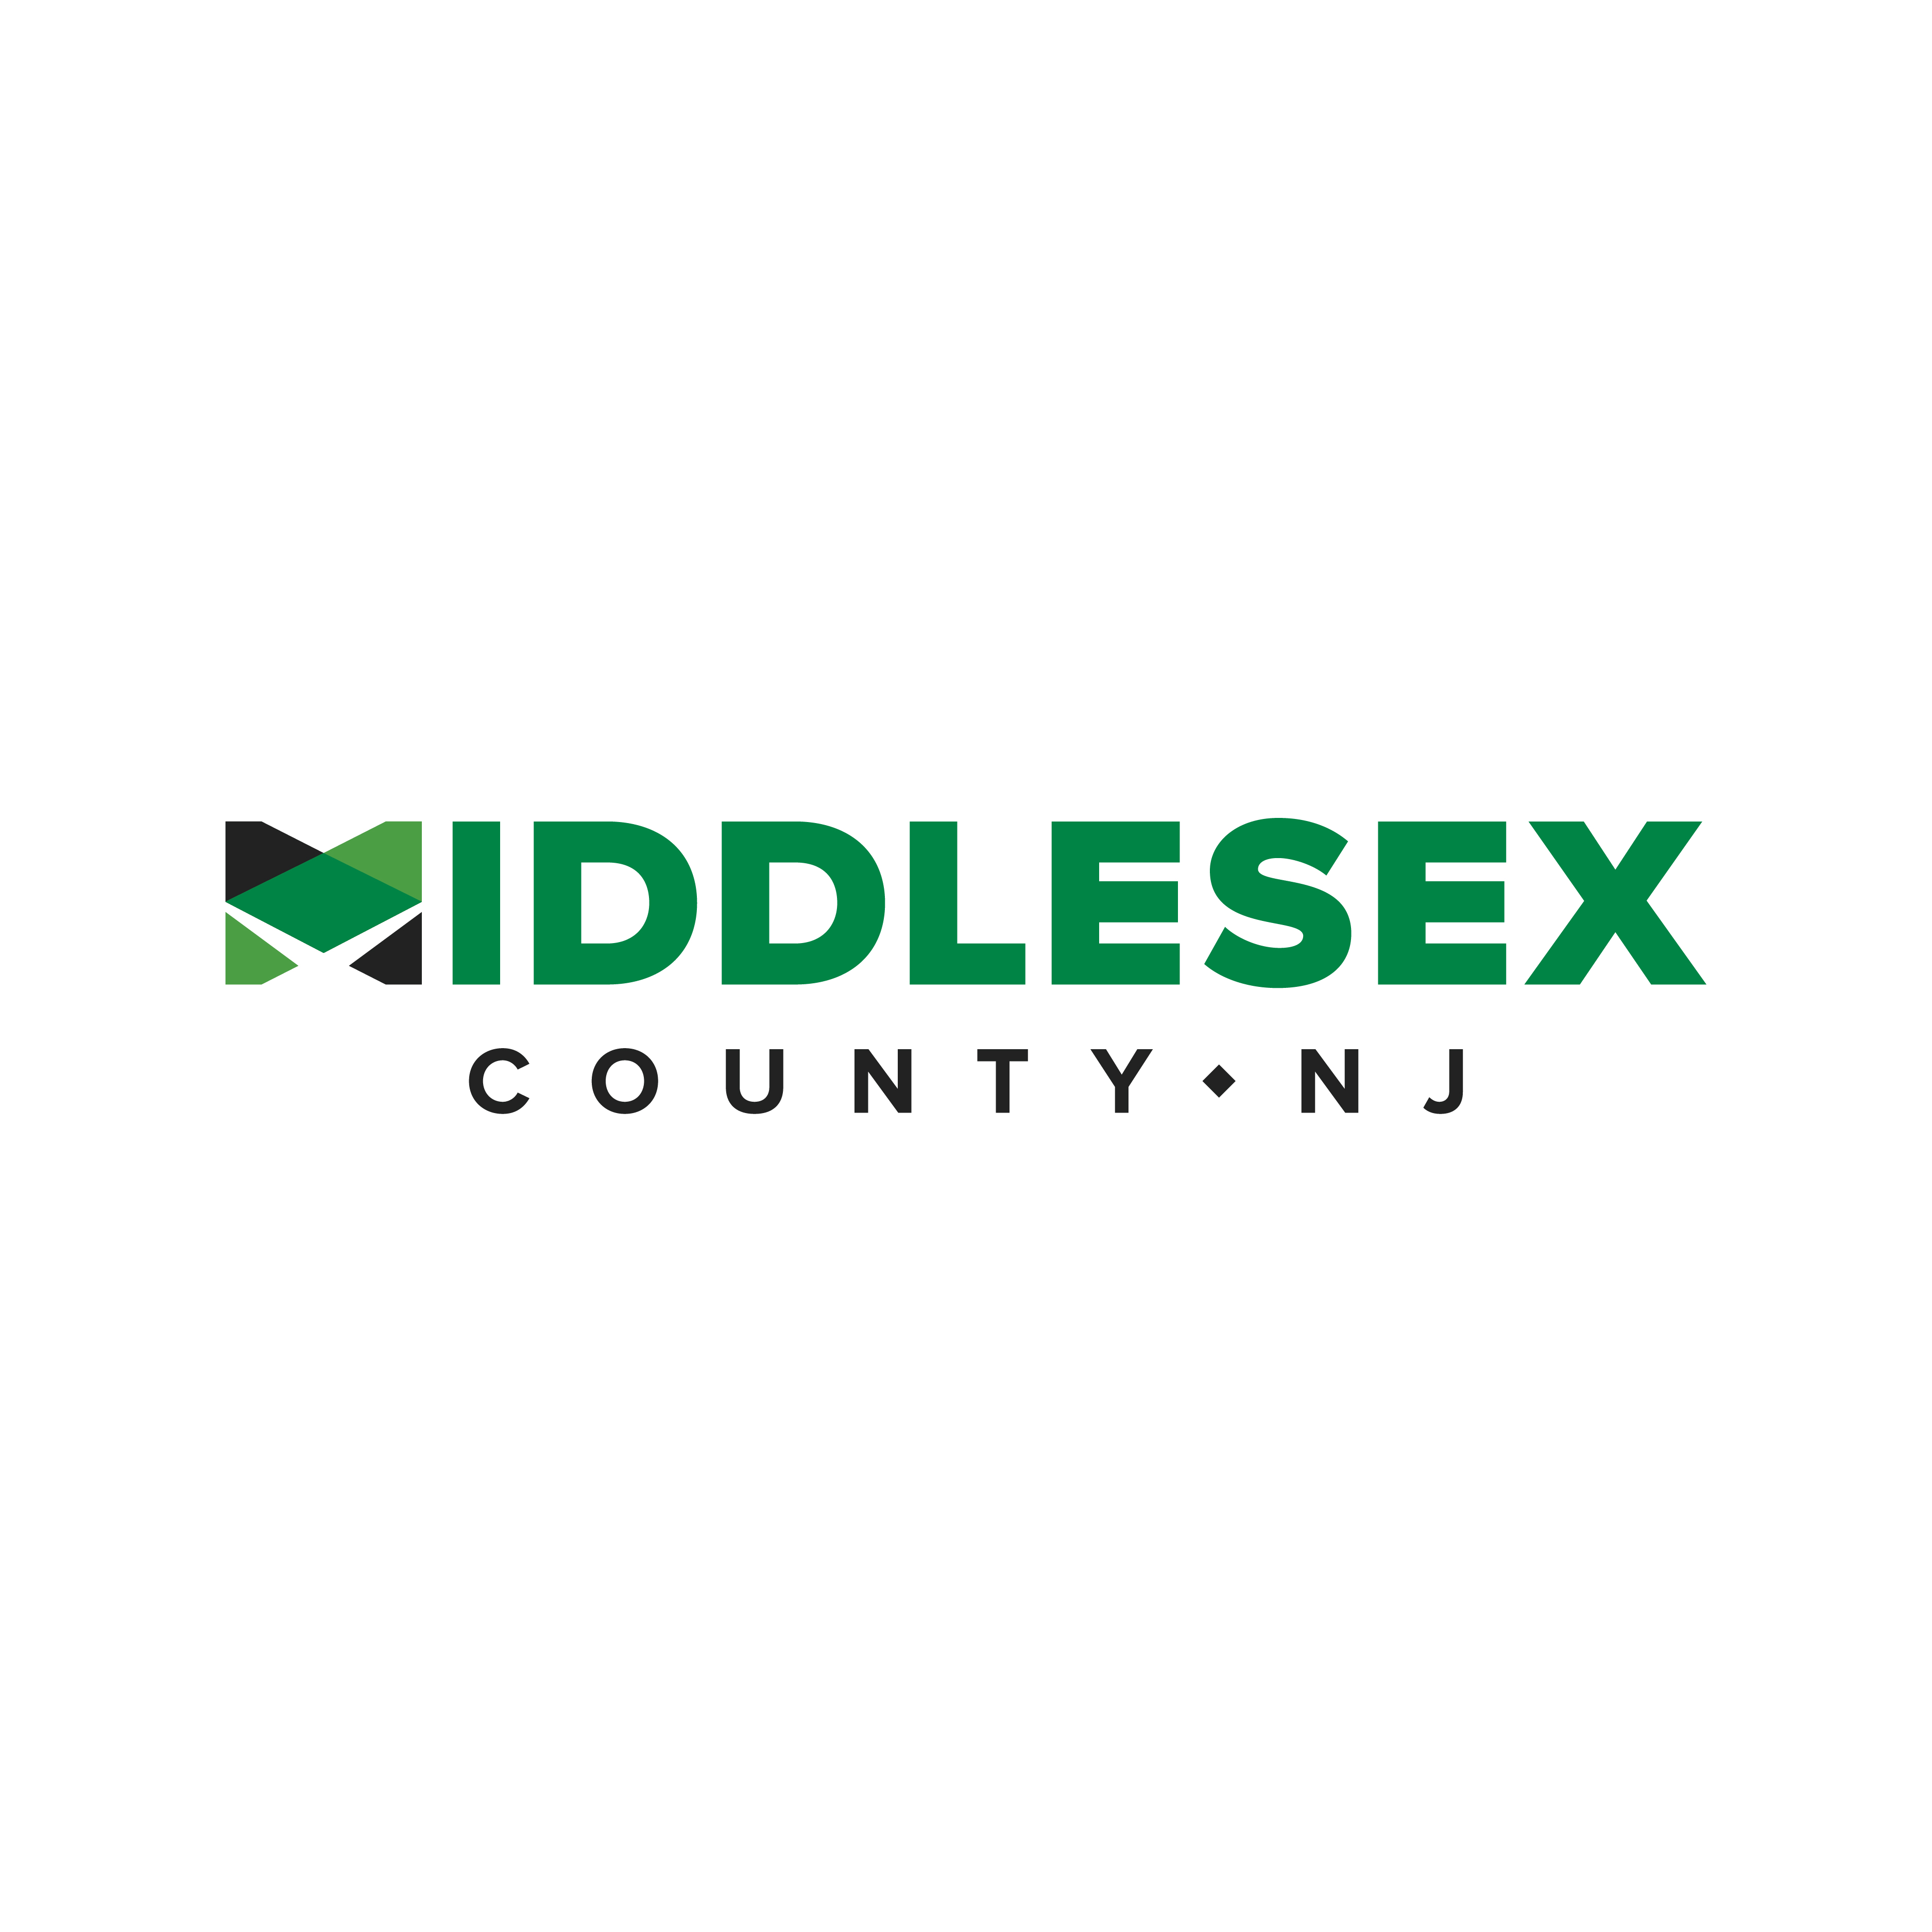 Middlesex County logo